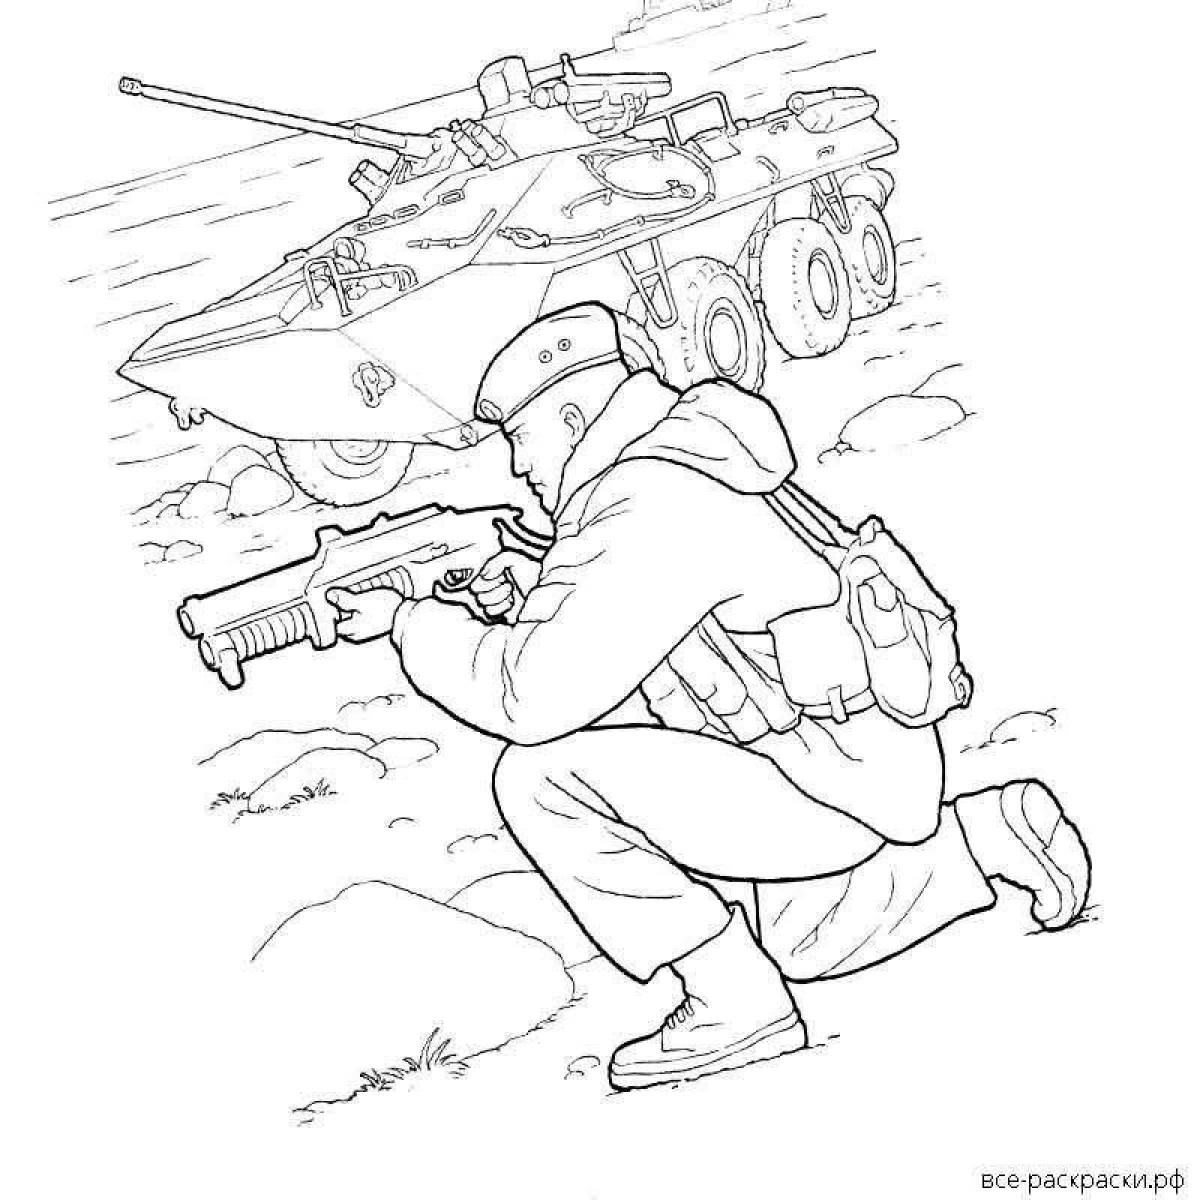 Bold coloring drawing of a soldier from a schoolboy